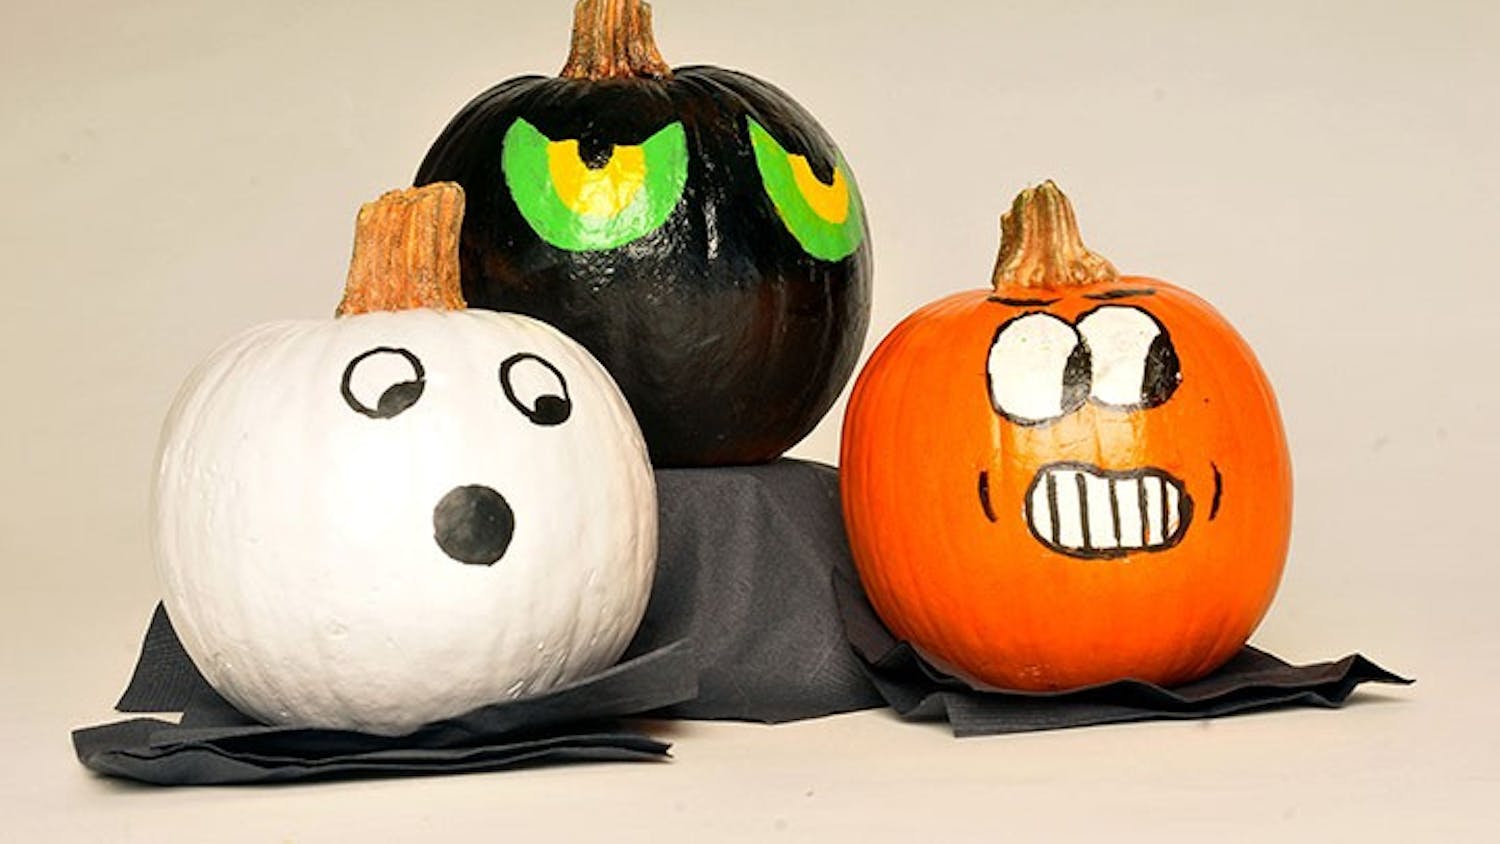 A set of three painted pumpkins on display. Painting a pumpkin is sometimes used as an alternative to carving it.
